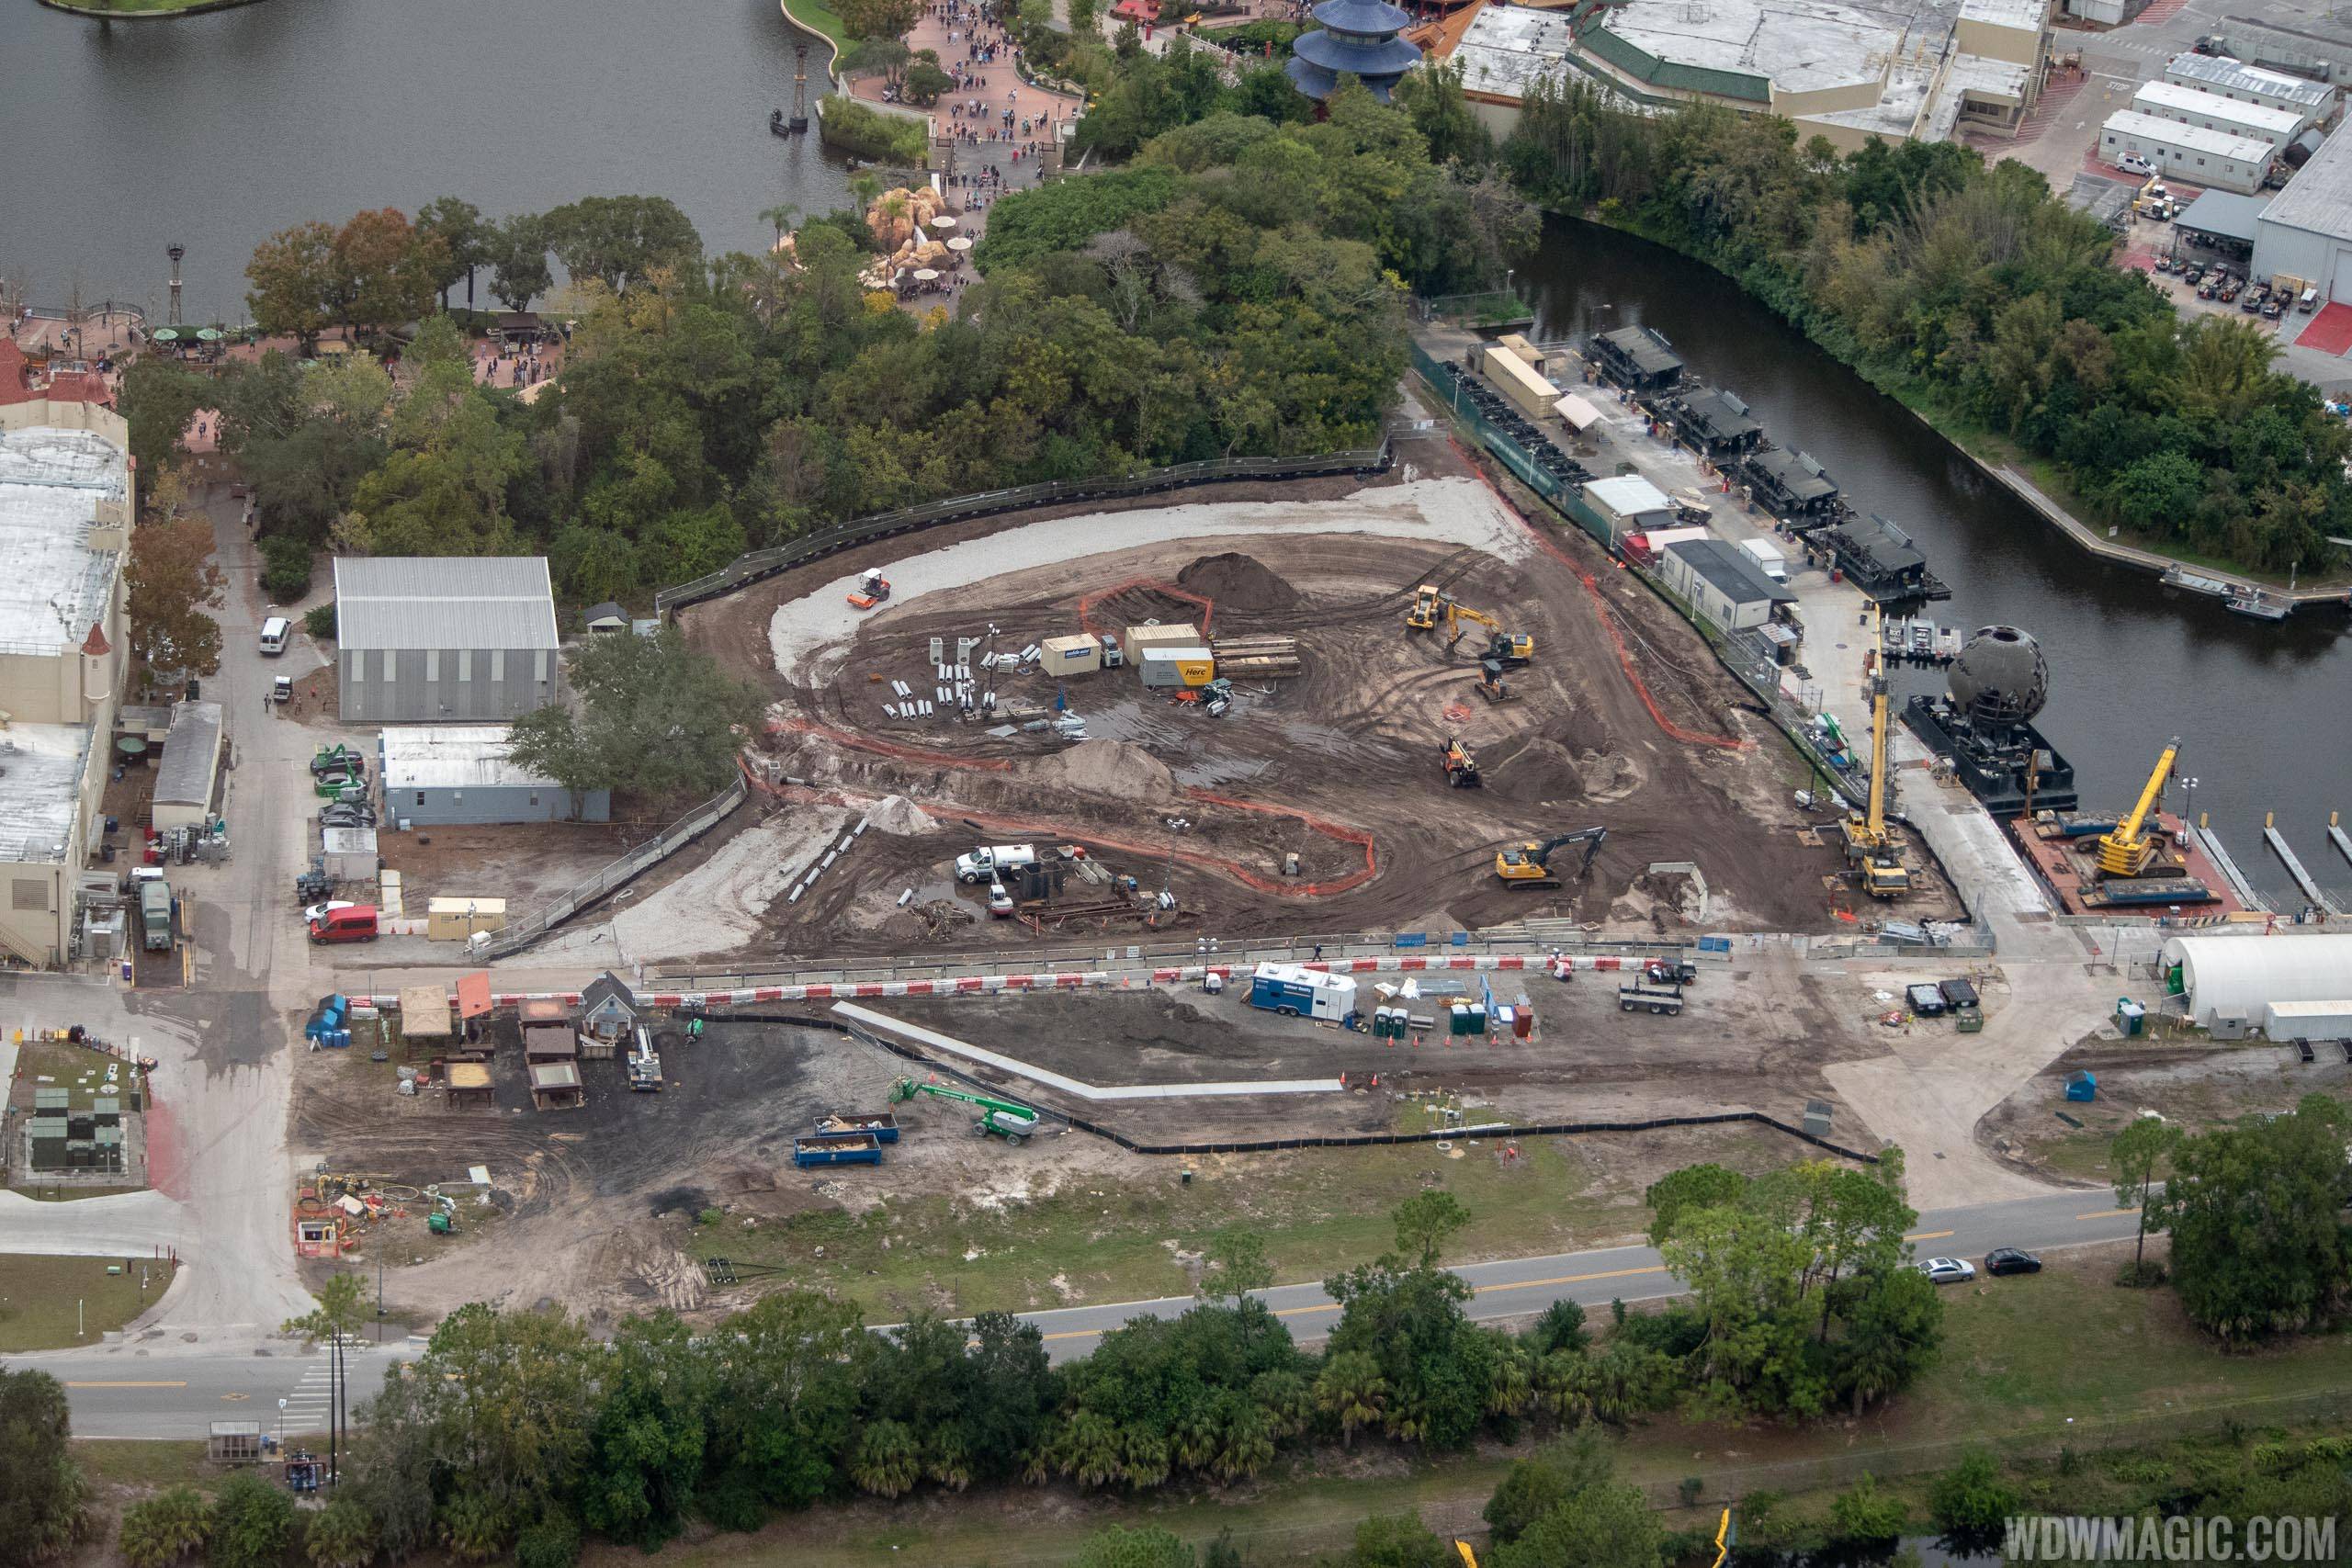 Aerial view of Epcot firework marina and construction site for future show preparations. Photo by @cchard